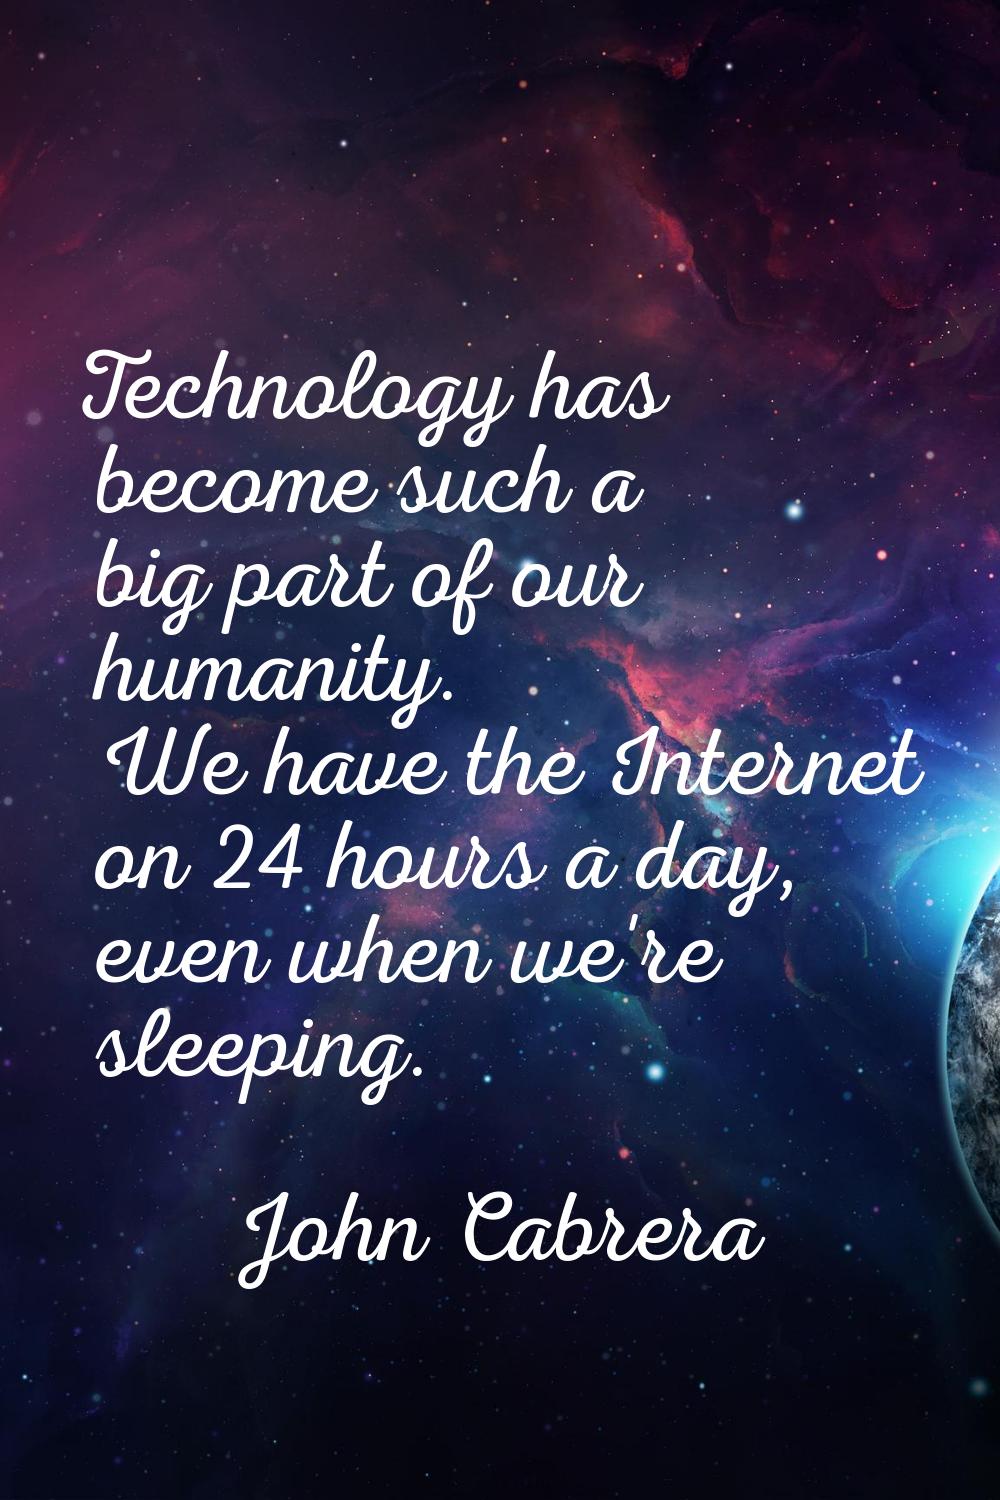 Technology has become such a big part of our humanity. We have the Internet on 24 hours a day, even